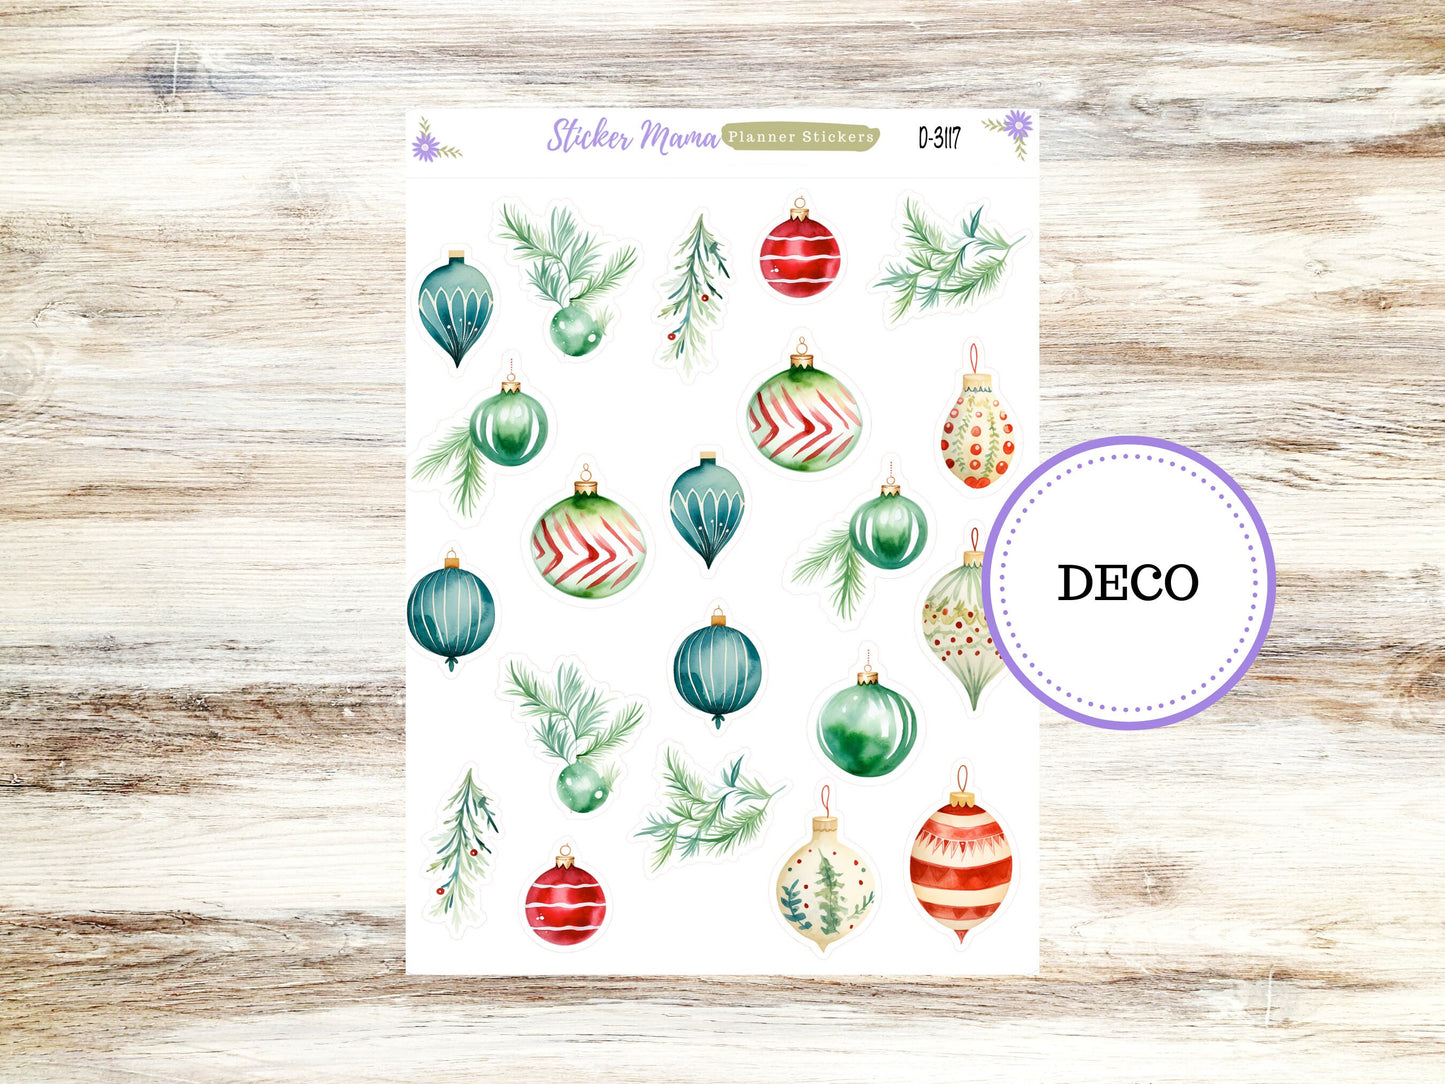 DECO-3117 || Merry Ornaments Deco || PLANNER STICKERS || Christmas Stickers ||